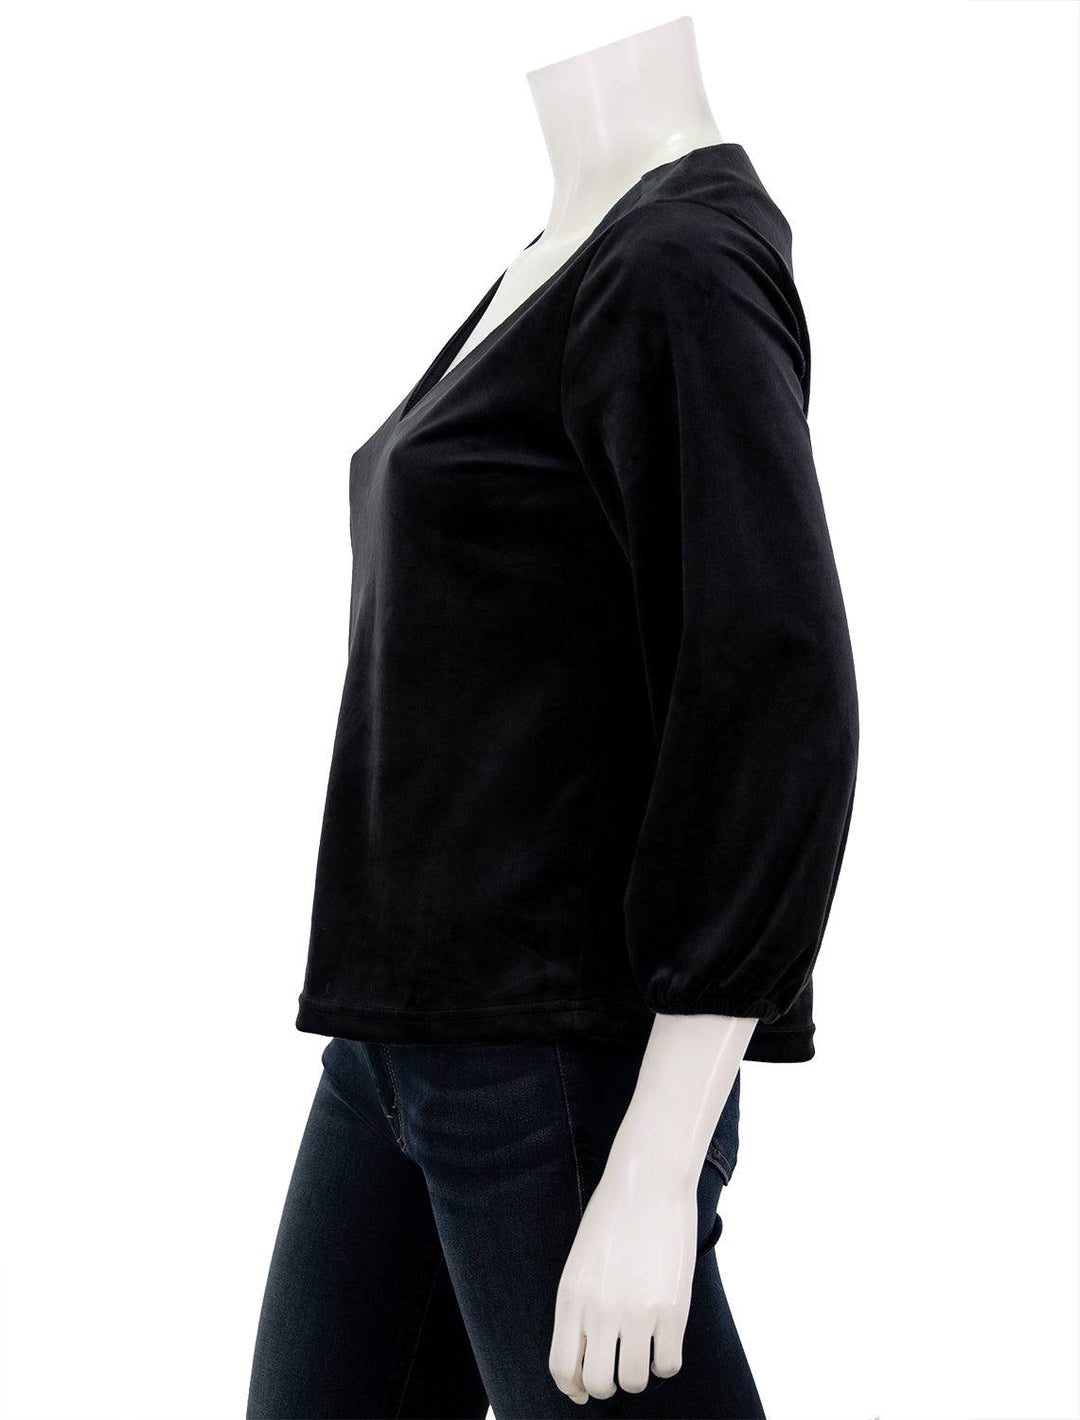 Side view of Marine Layer's velour v neck top in black.